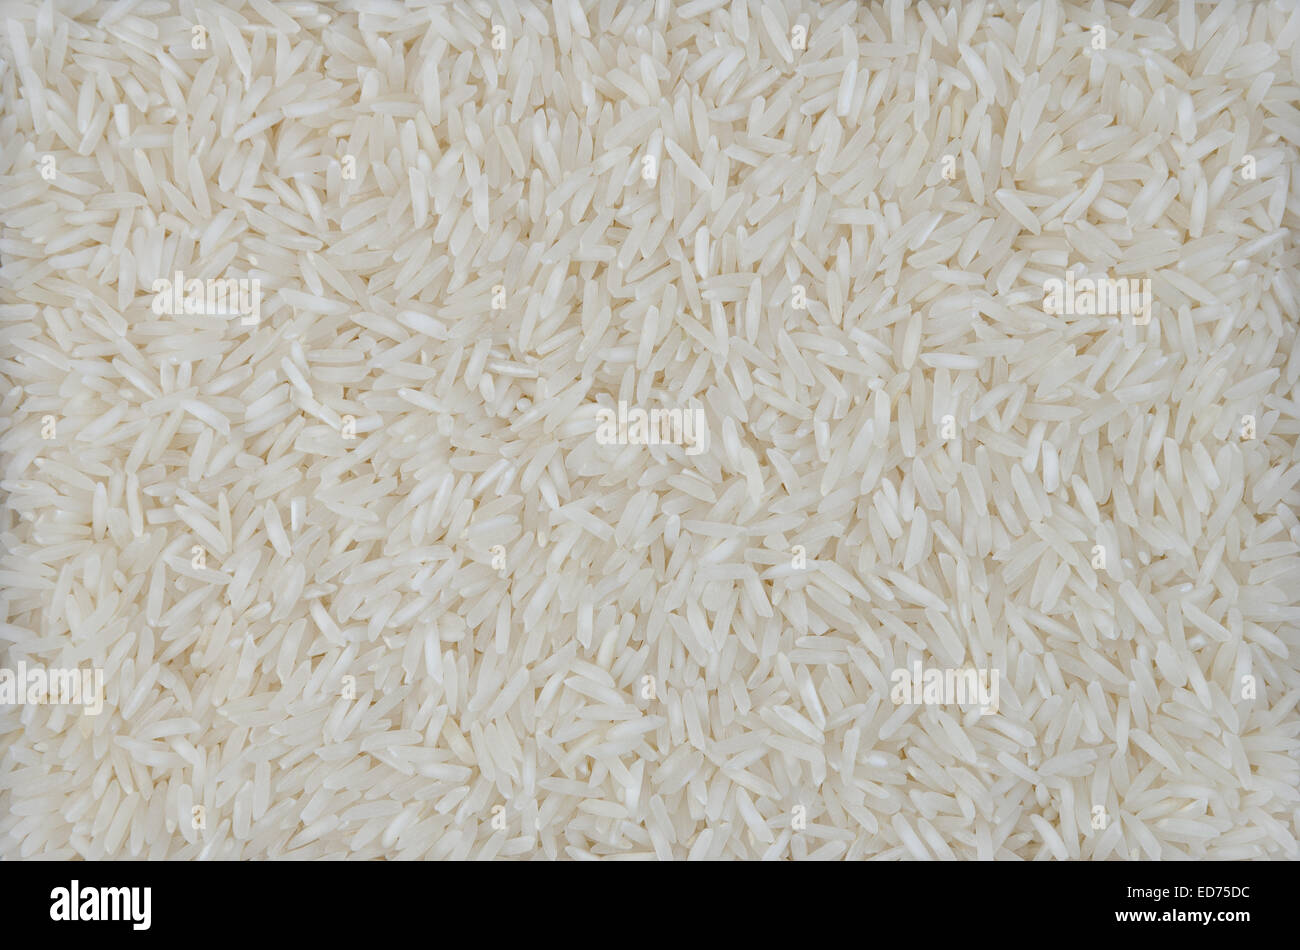 Basmati Rice Background. Processed basmati rice on a straight surface coated, usable as background. Stock Photo